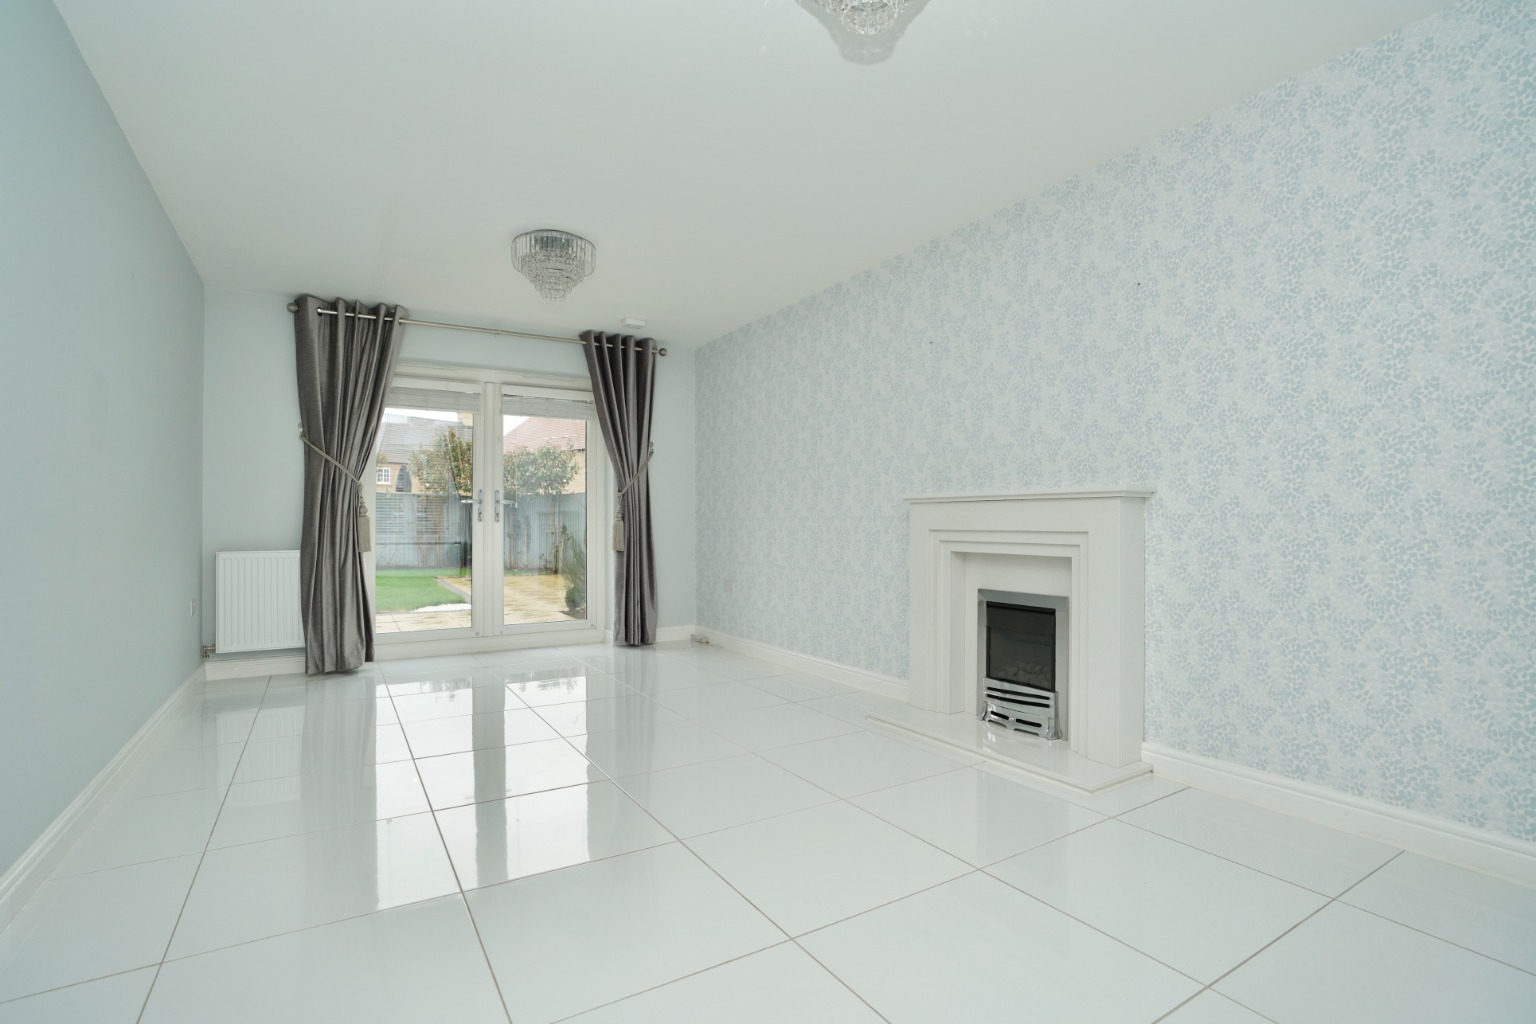 4 bed detached house for sale in Carnaile Road, Huntingdon  - Property Image 3